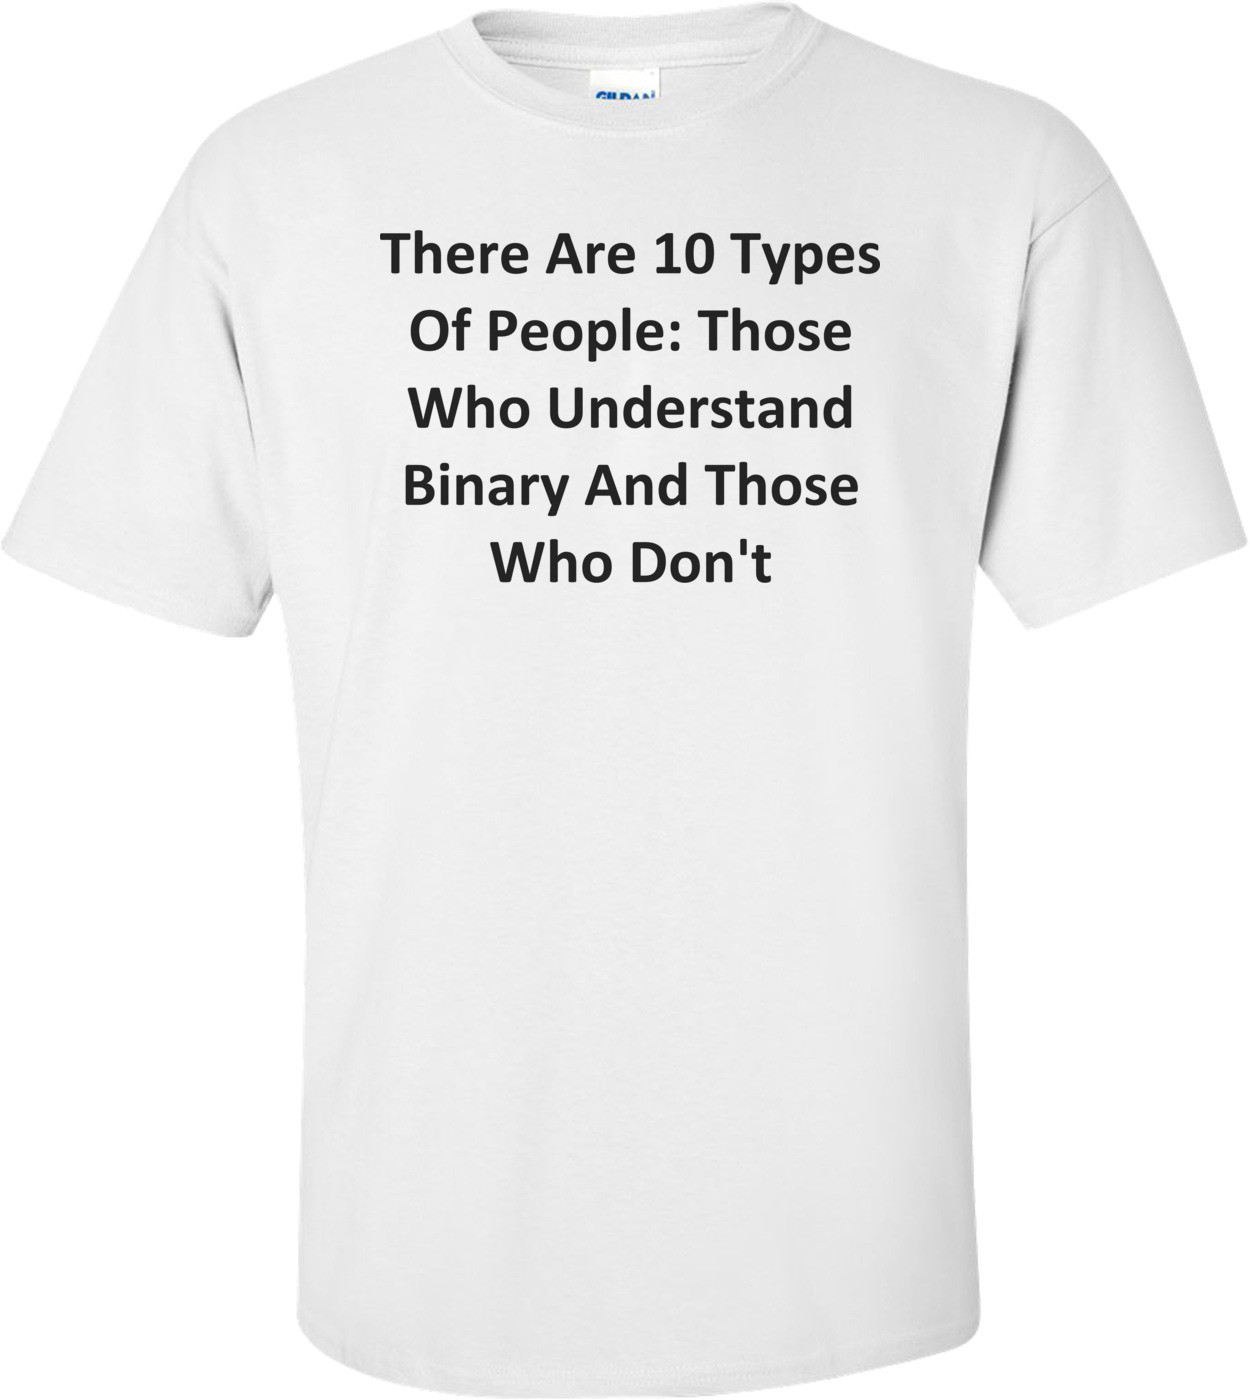 There Are 10 Types Of People: Those Who Understand Binary And Those Who Don't T-Shirt